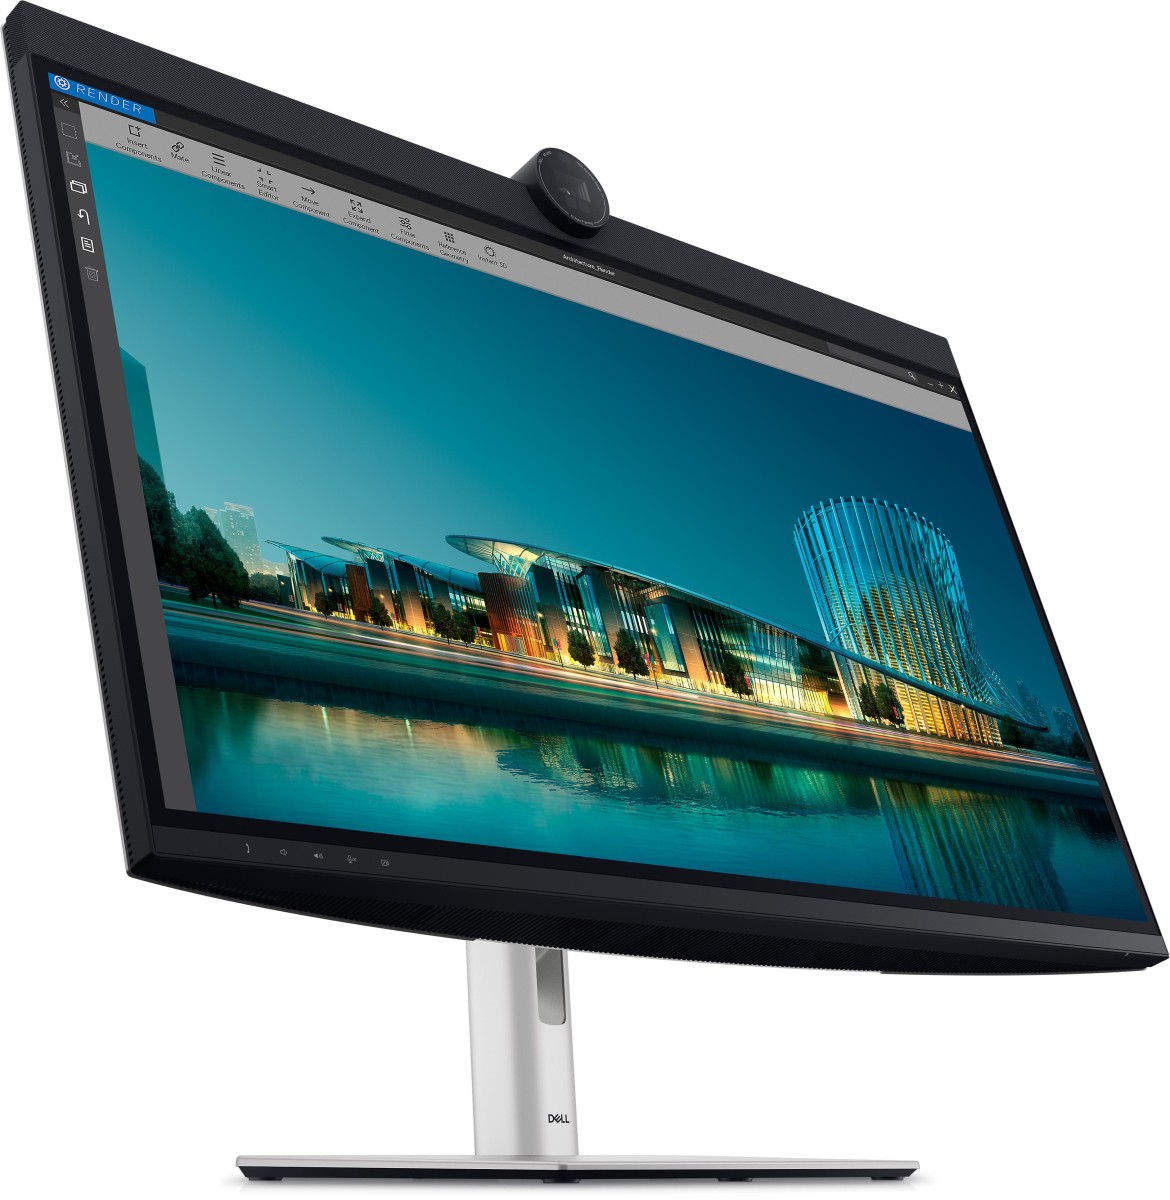 Dell unveils the world's first 6K monitor with IPS Black panel tech